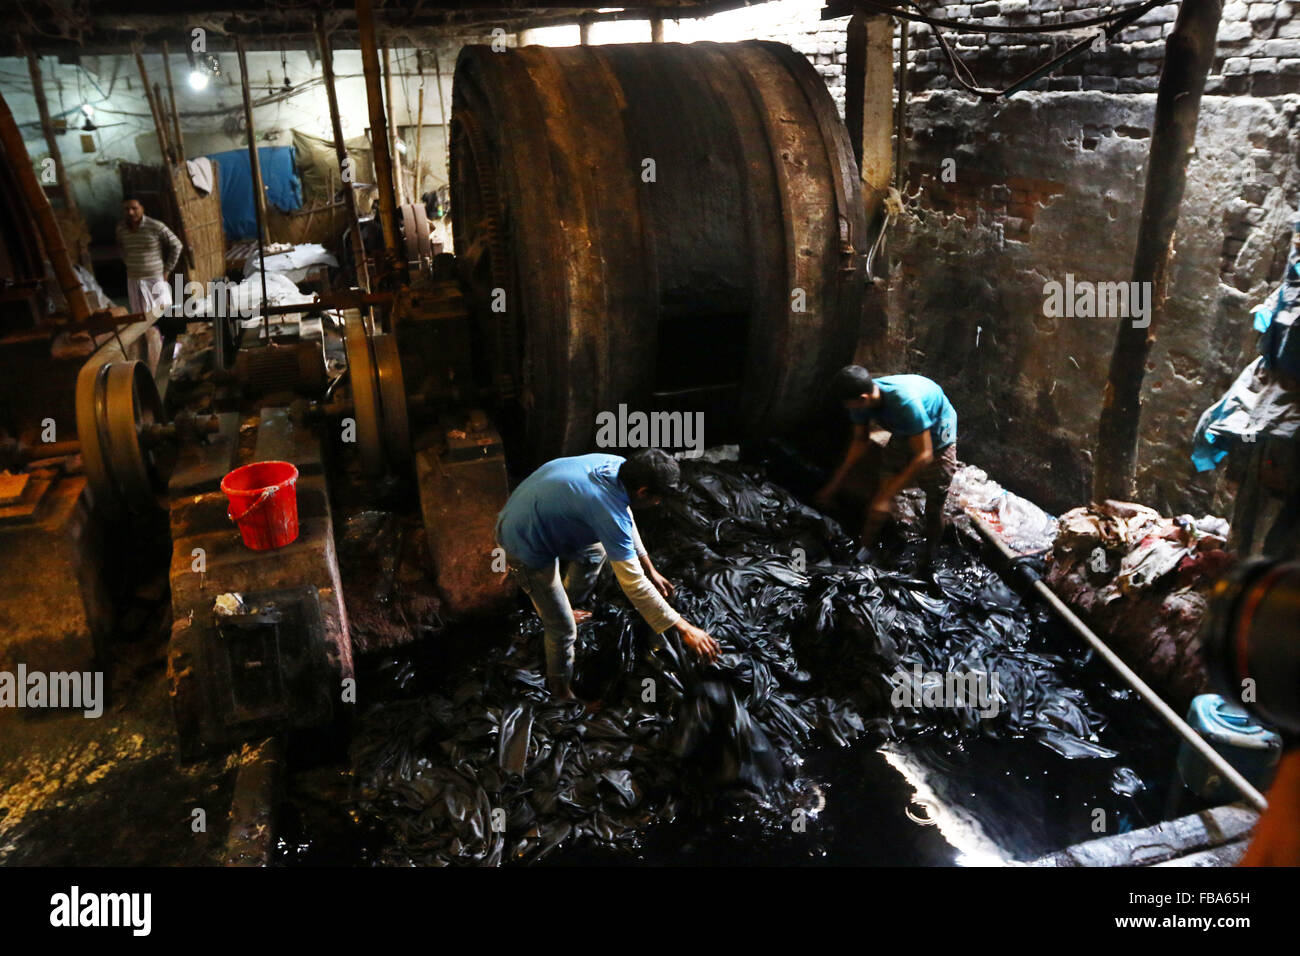 Dhaka 13 January 2016. Workers process animal skins in a Leather factory in Hazaribagh, Dhaka. Tanneries in the city's Hazaribagh area discharge 30000 square meters of liquid waste everyday. The tanneries discharge the effluents into the river system causing a large area of acid sludge..The Bangladeshi leather industry has earned 980.67 million US dollar from the exports of leather and leather goods in fiscal 2012/2013, according to Bangladesh's Export Promotion Bureau. Stock Photo